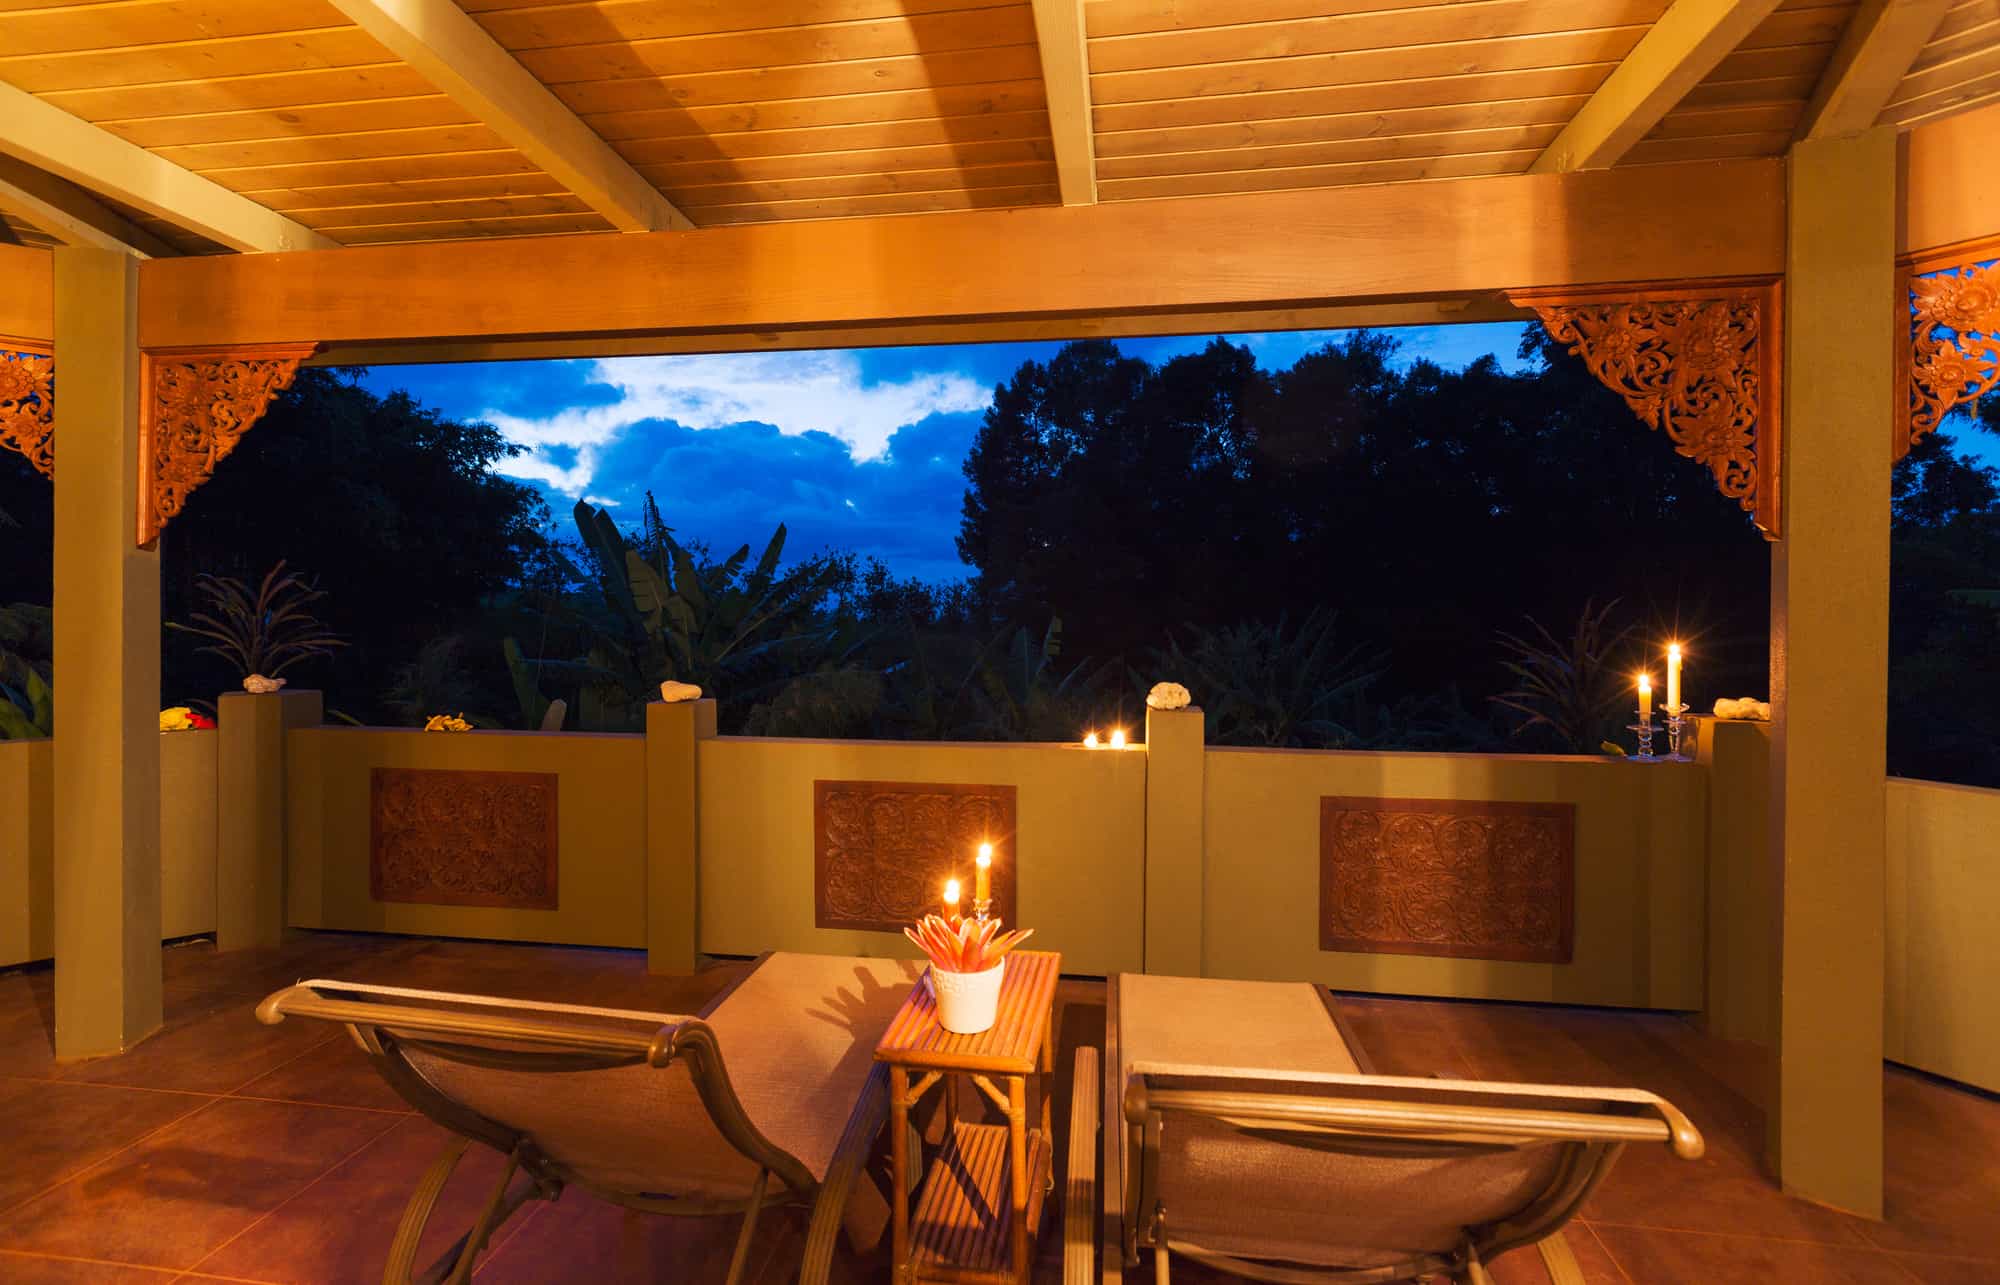 9 Beautiful Lighting Ideas For Your Covered Patio